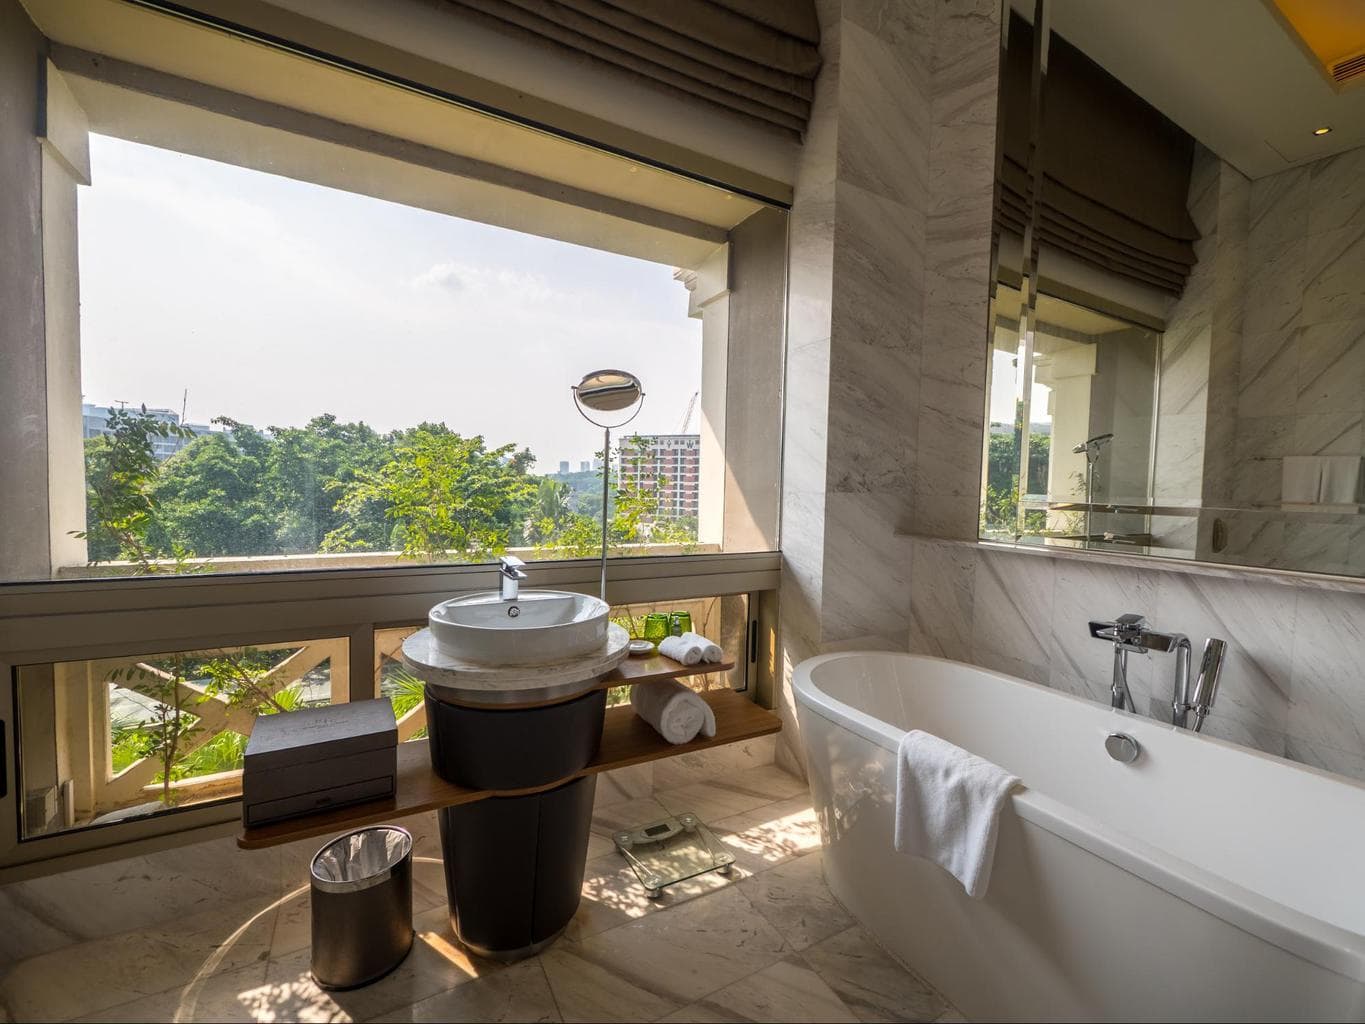 The sun-kissed verandah bathrooms at Hotel Fort Canning